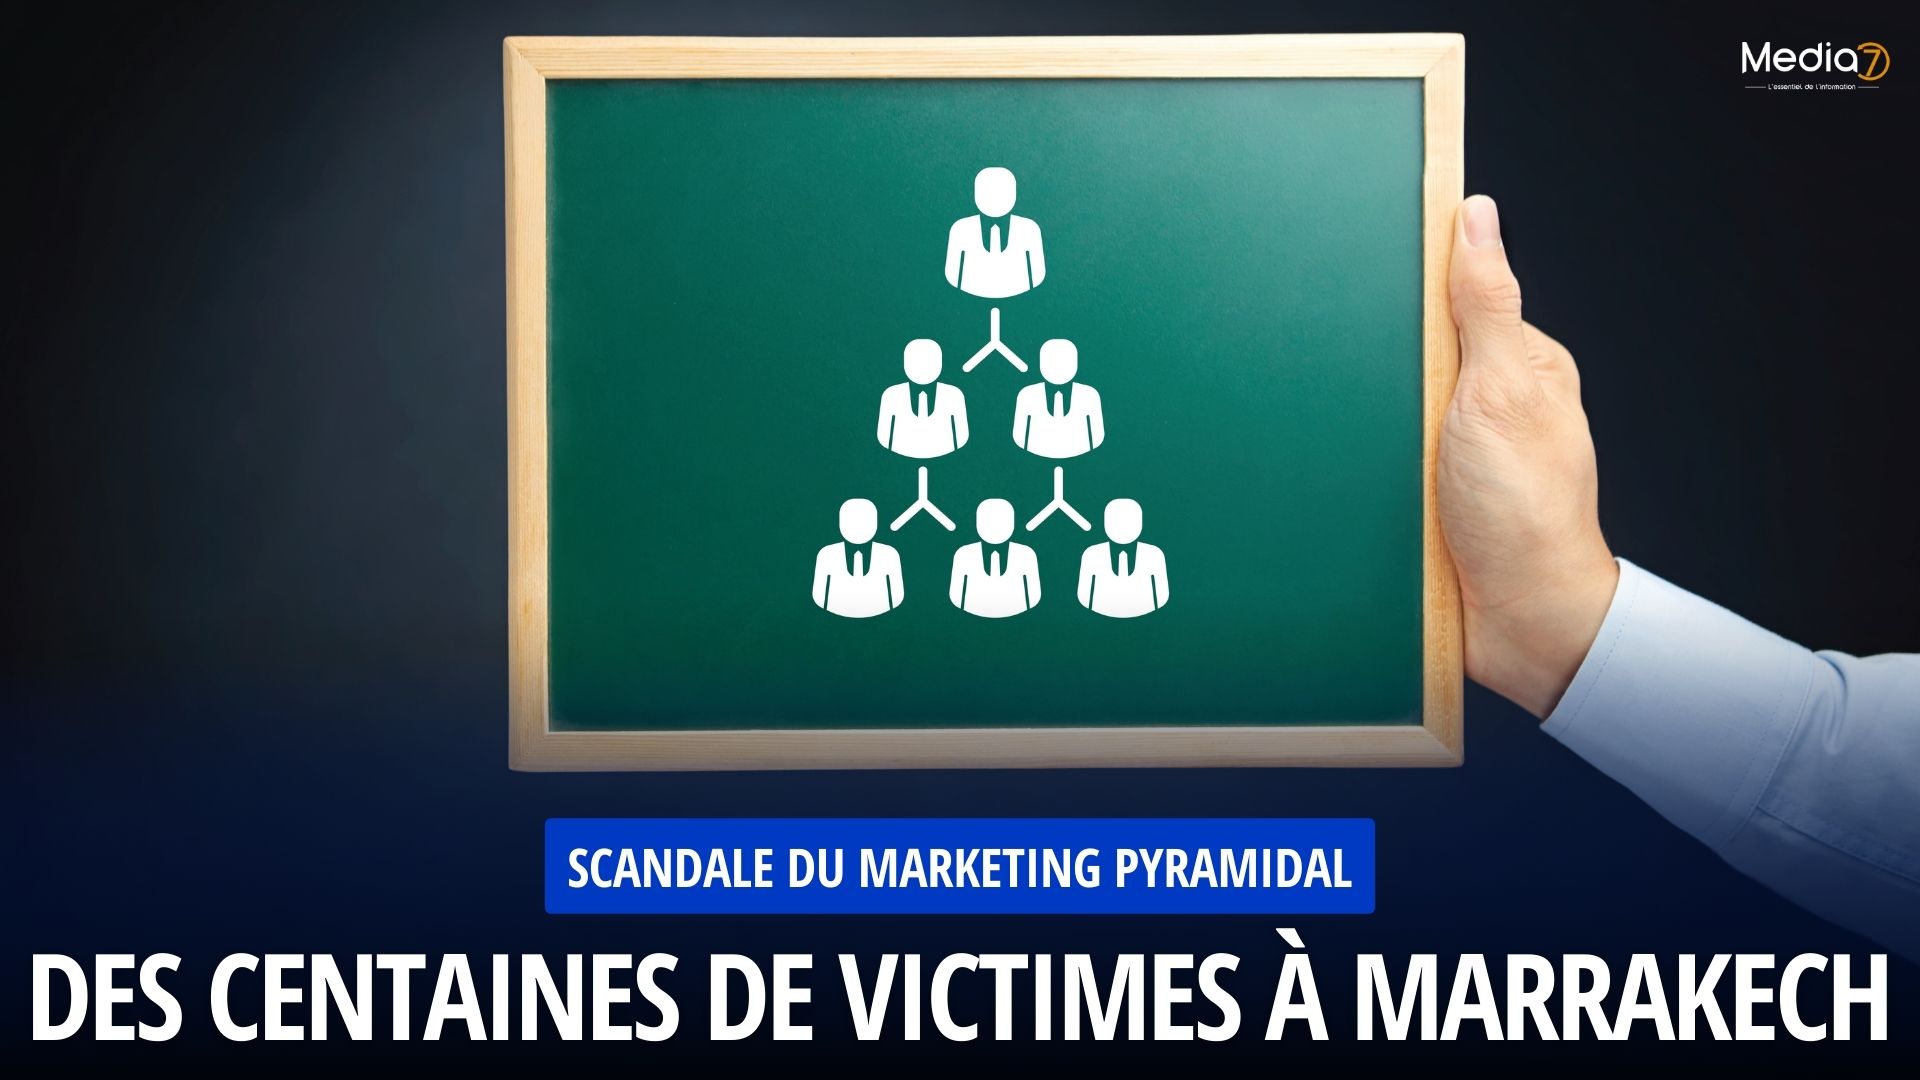 Pyramid Marketing Scandal: Hundreds of Victims in Marrakech